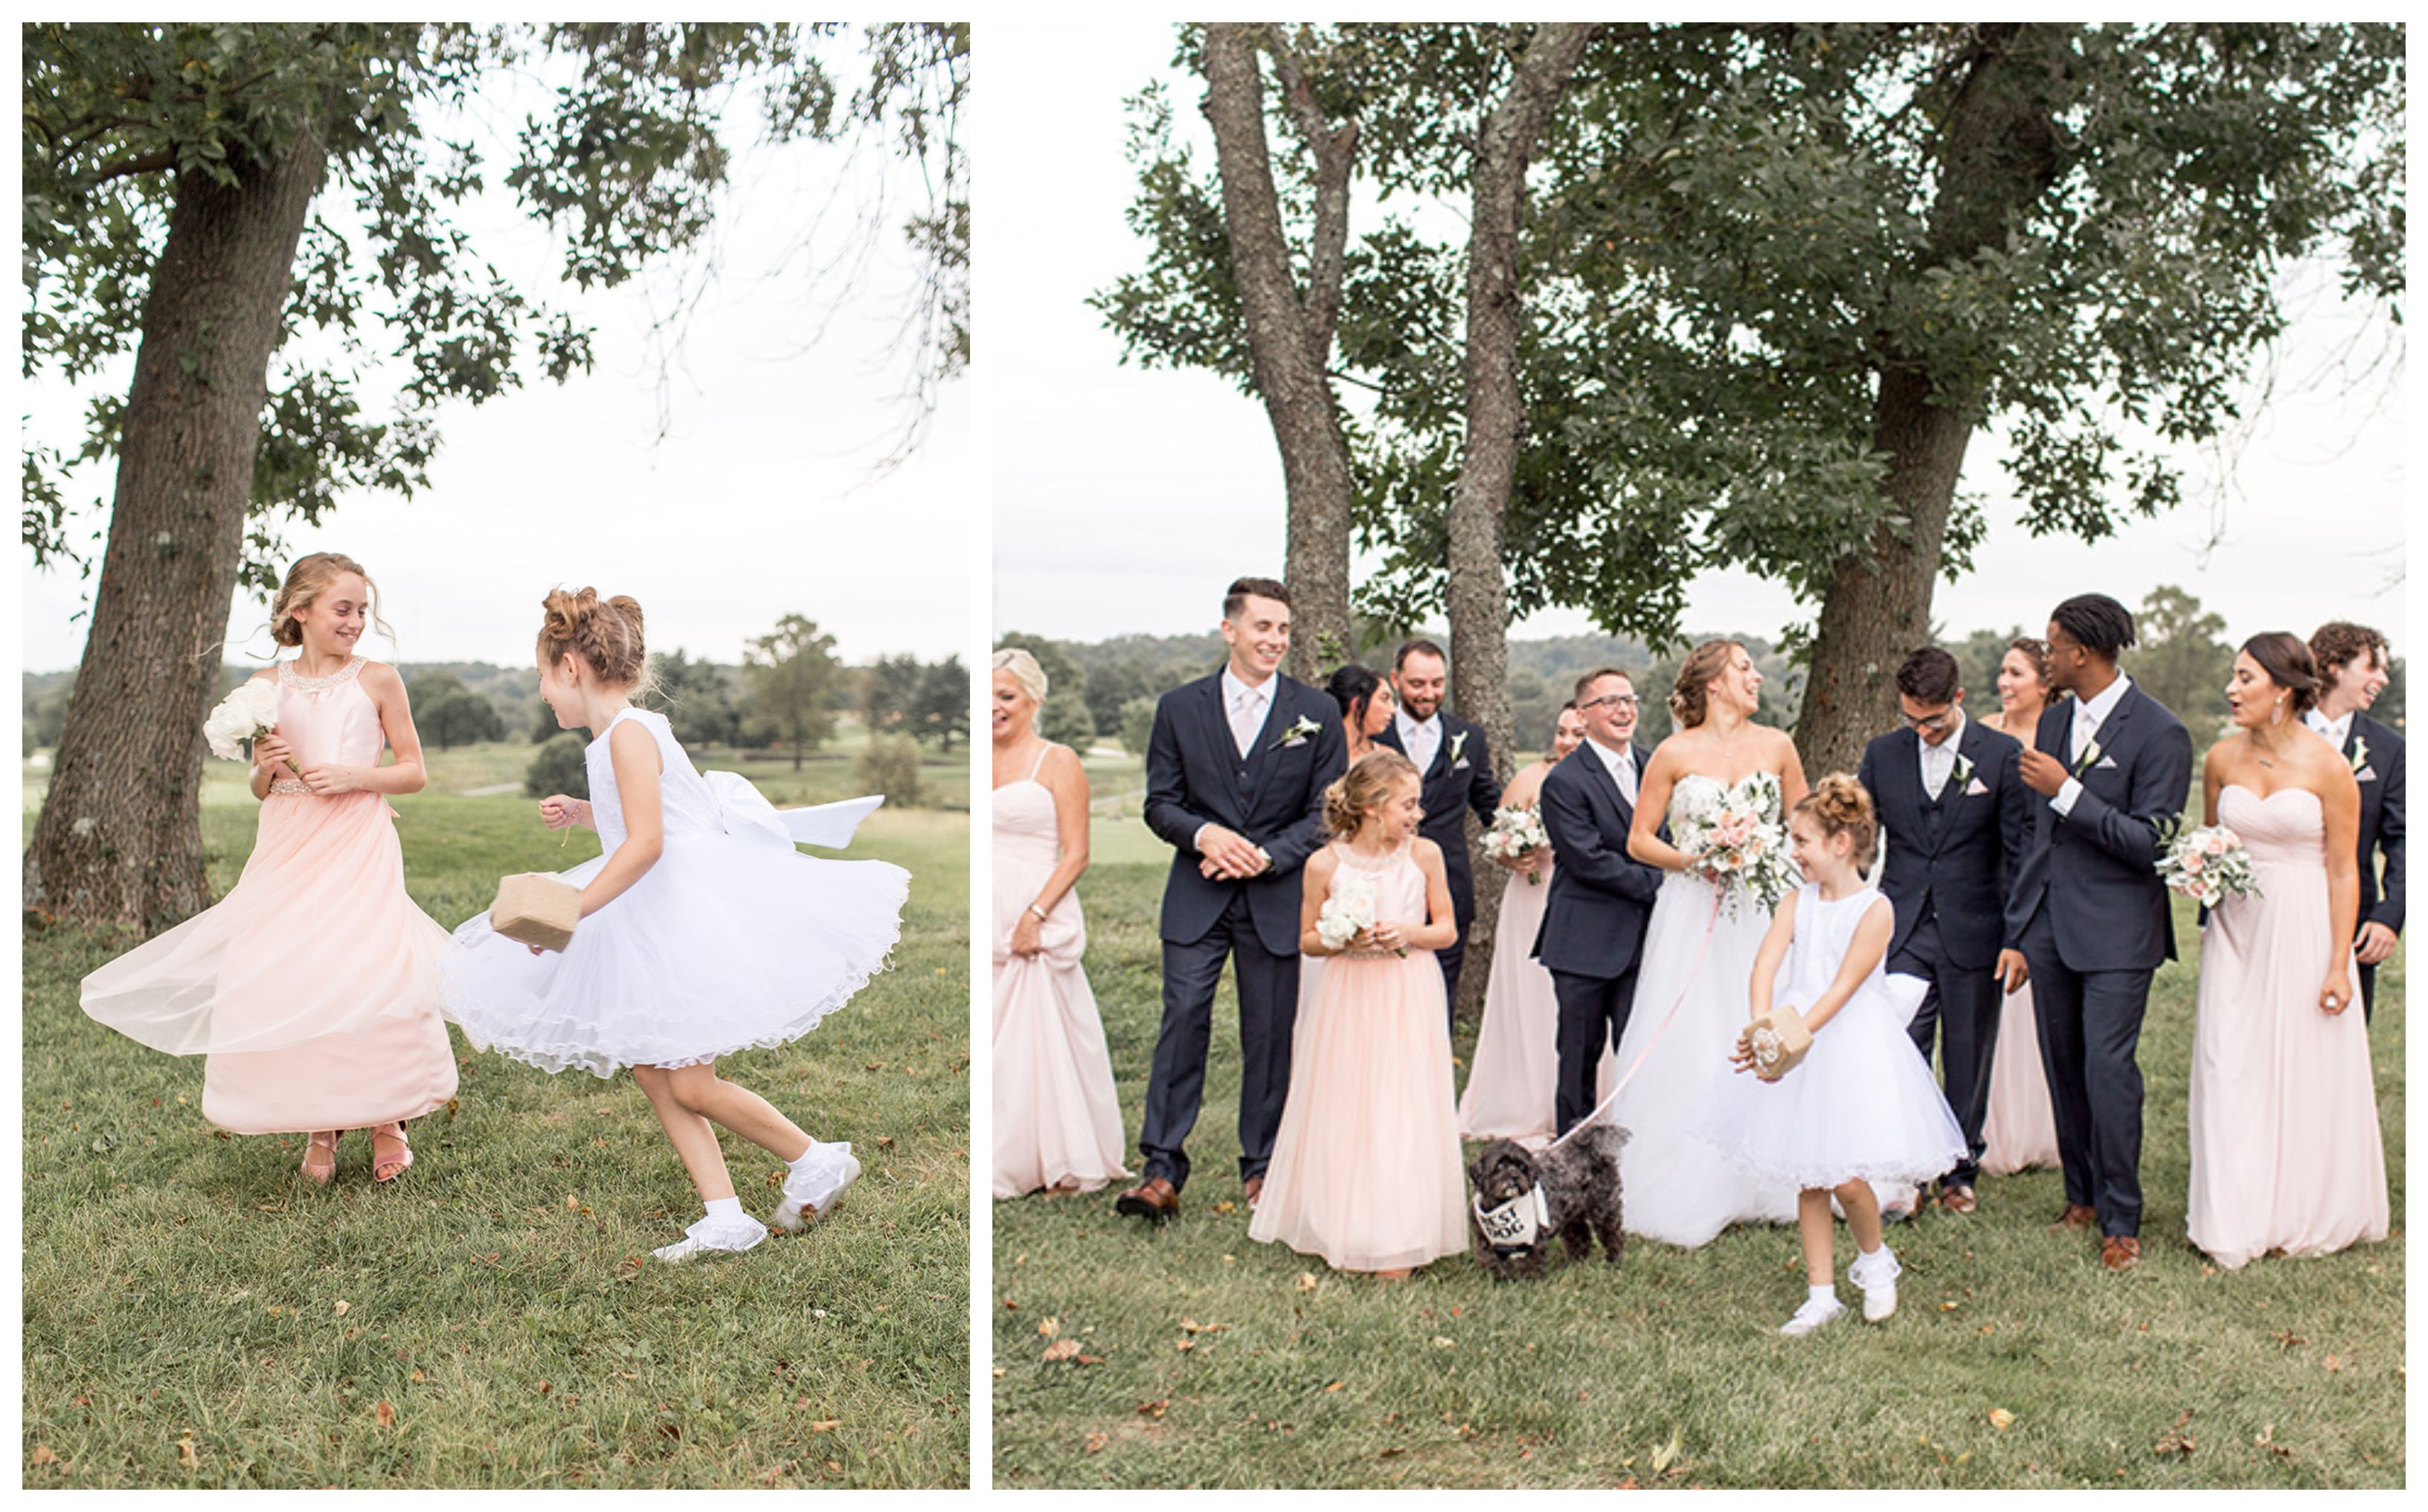 candid moments with the bridal party